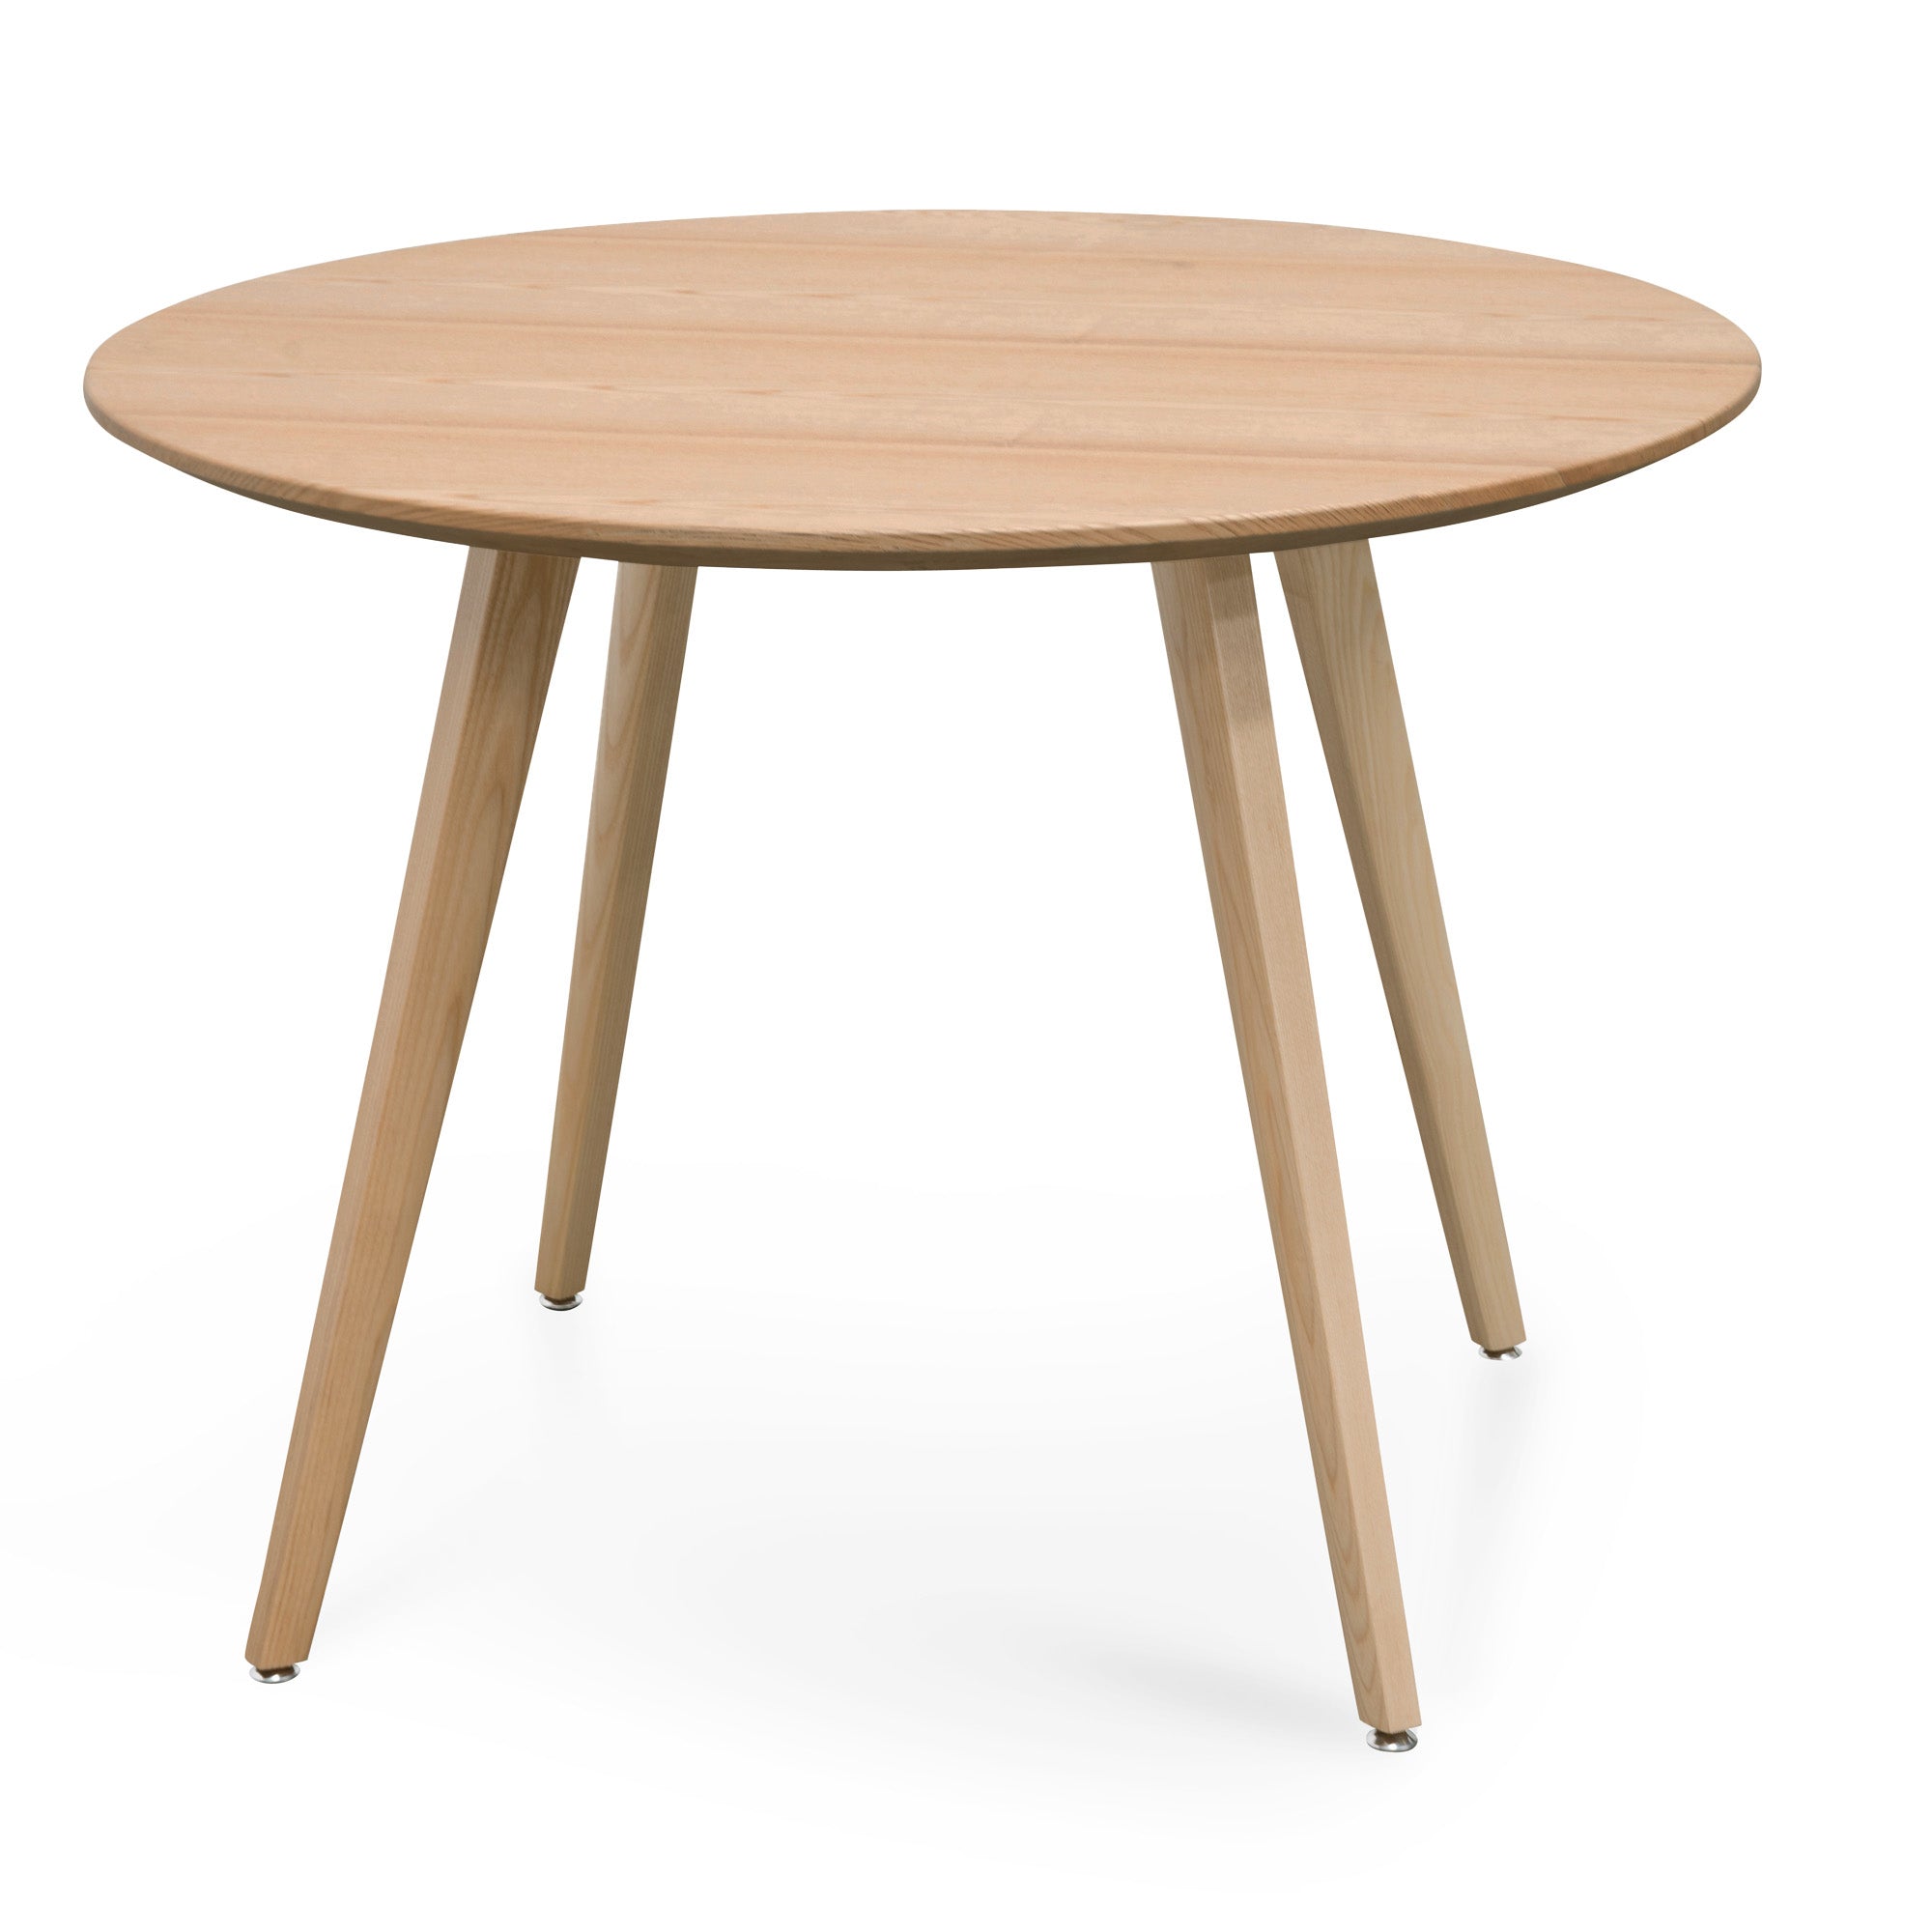 Smith 100cm Round Wooden Dining Table - Natural - Dining Tables